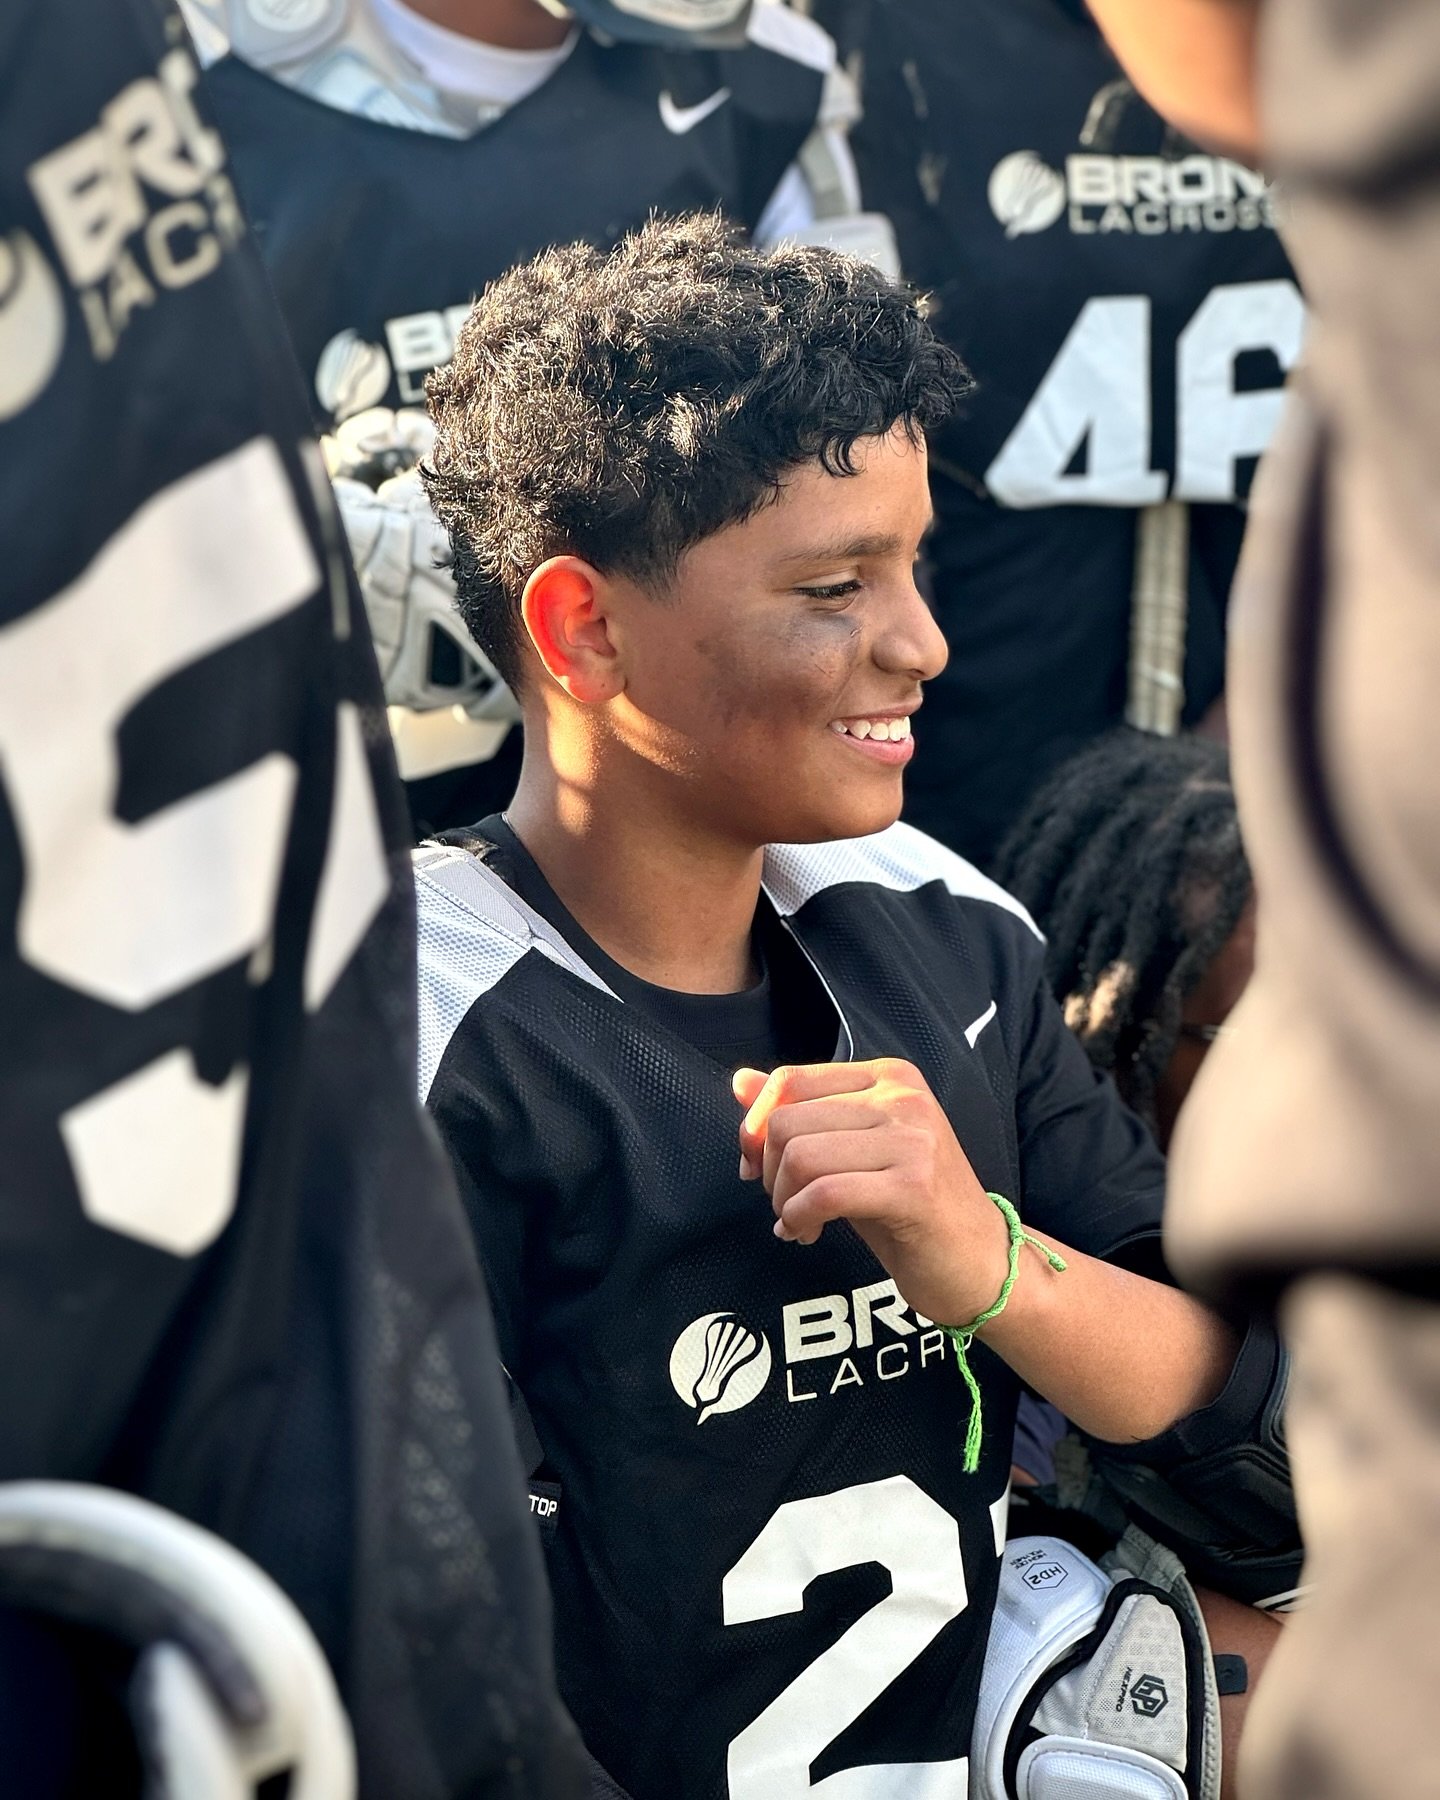 Joshua Baez, 6th Grader, not only has a knack for scoring goals, but also brings his infectious smile and positive energy to his teammates every single day. Keep it up Joshua!